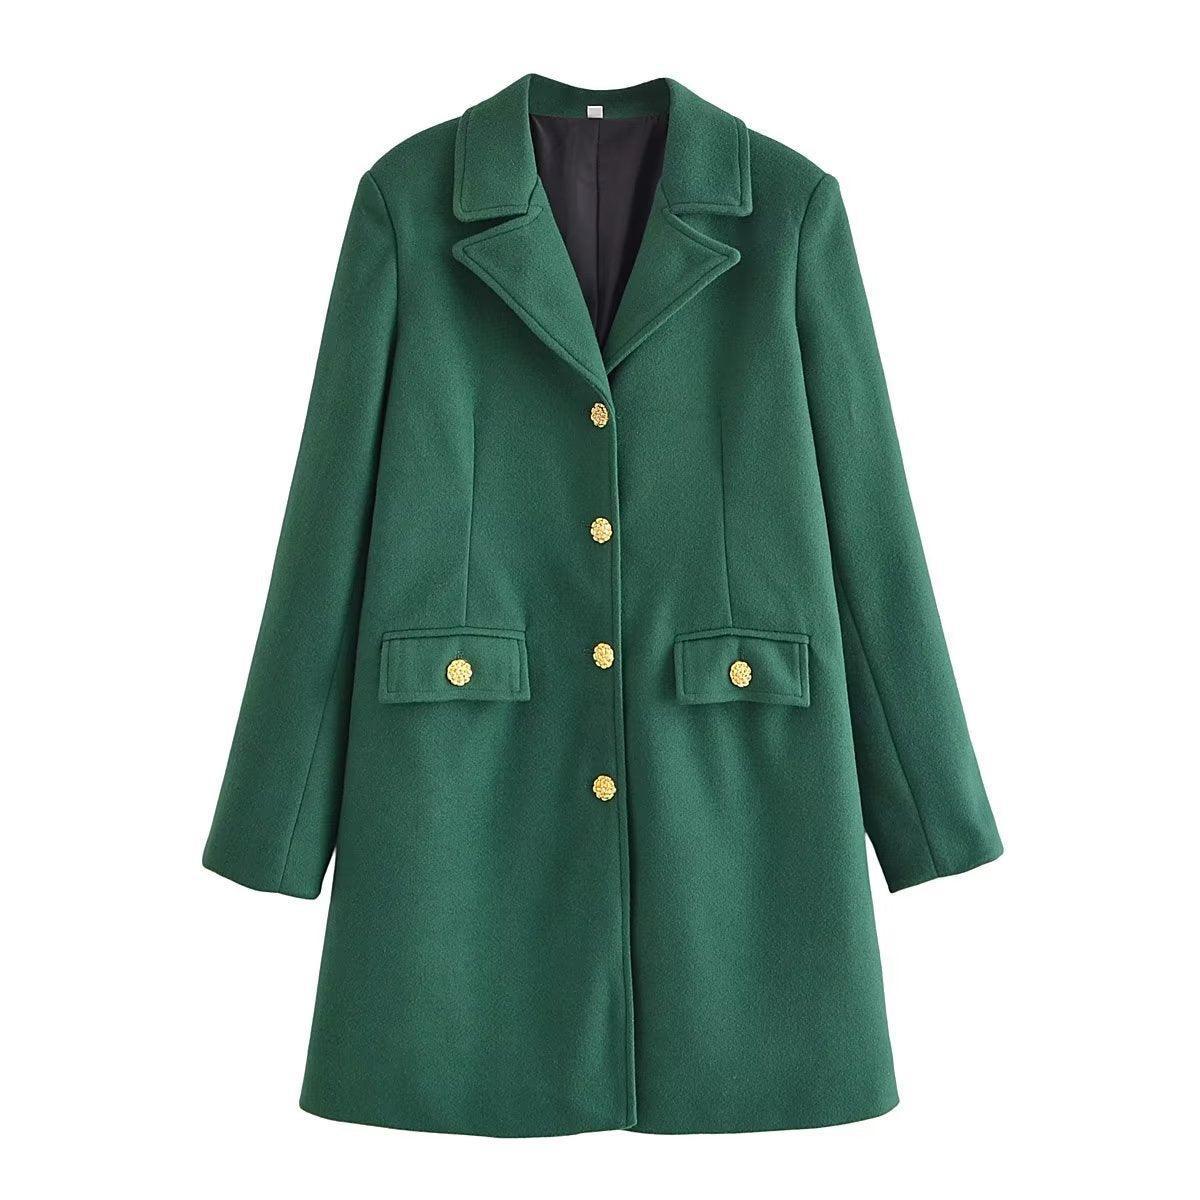 Dark Green Wool Coat - A Must-Have for Fall and Winter - ForVanity coat, jackets & coats, women's clothing, wool Coat